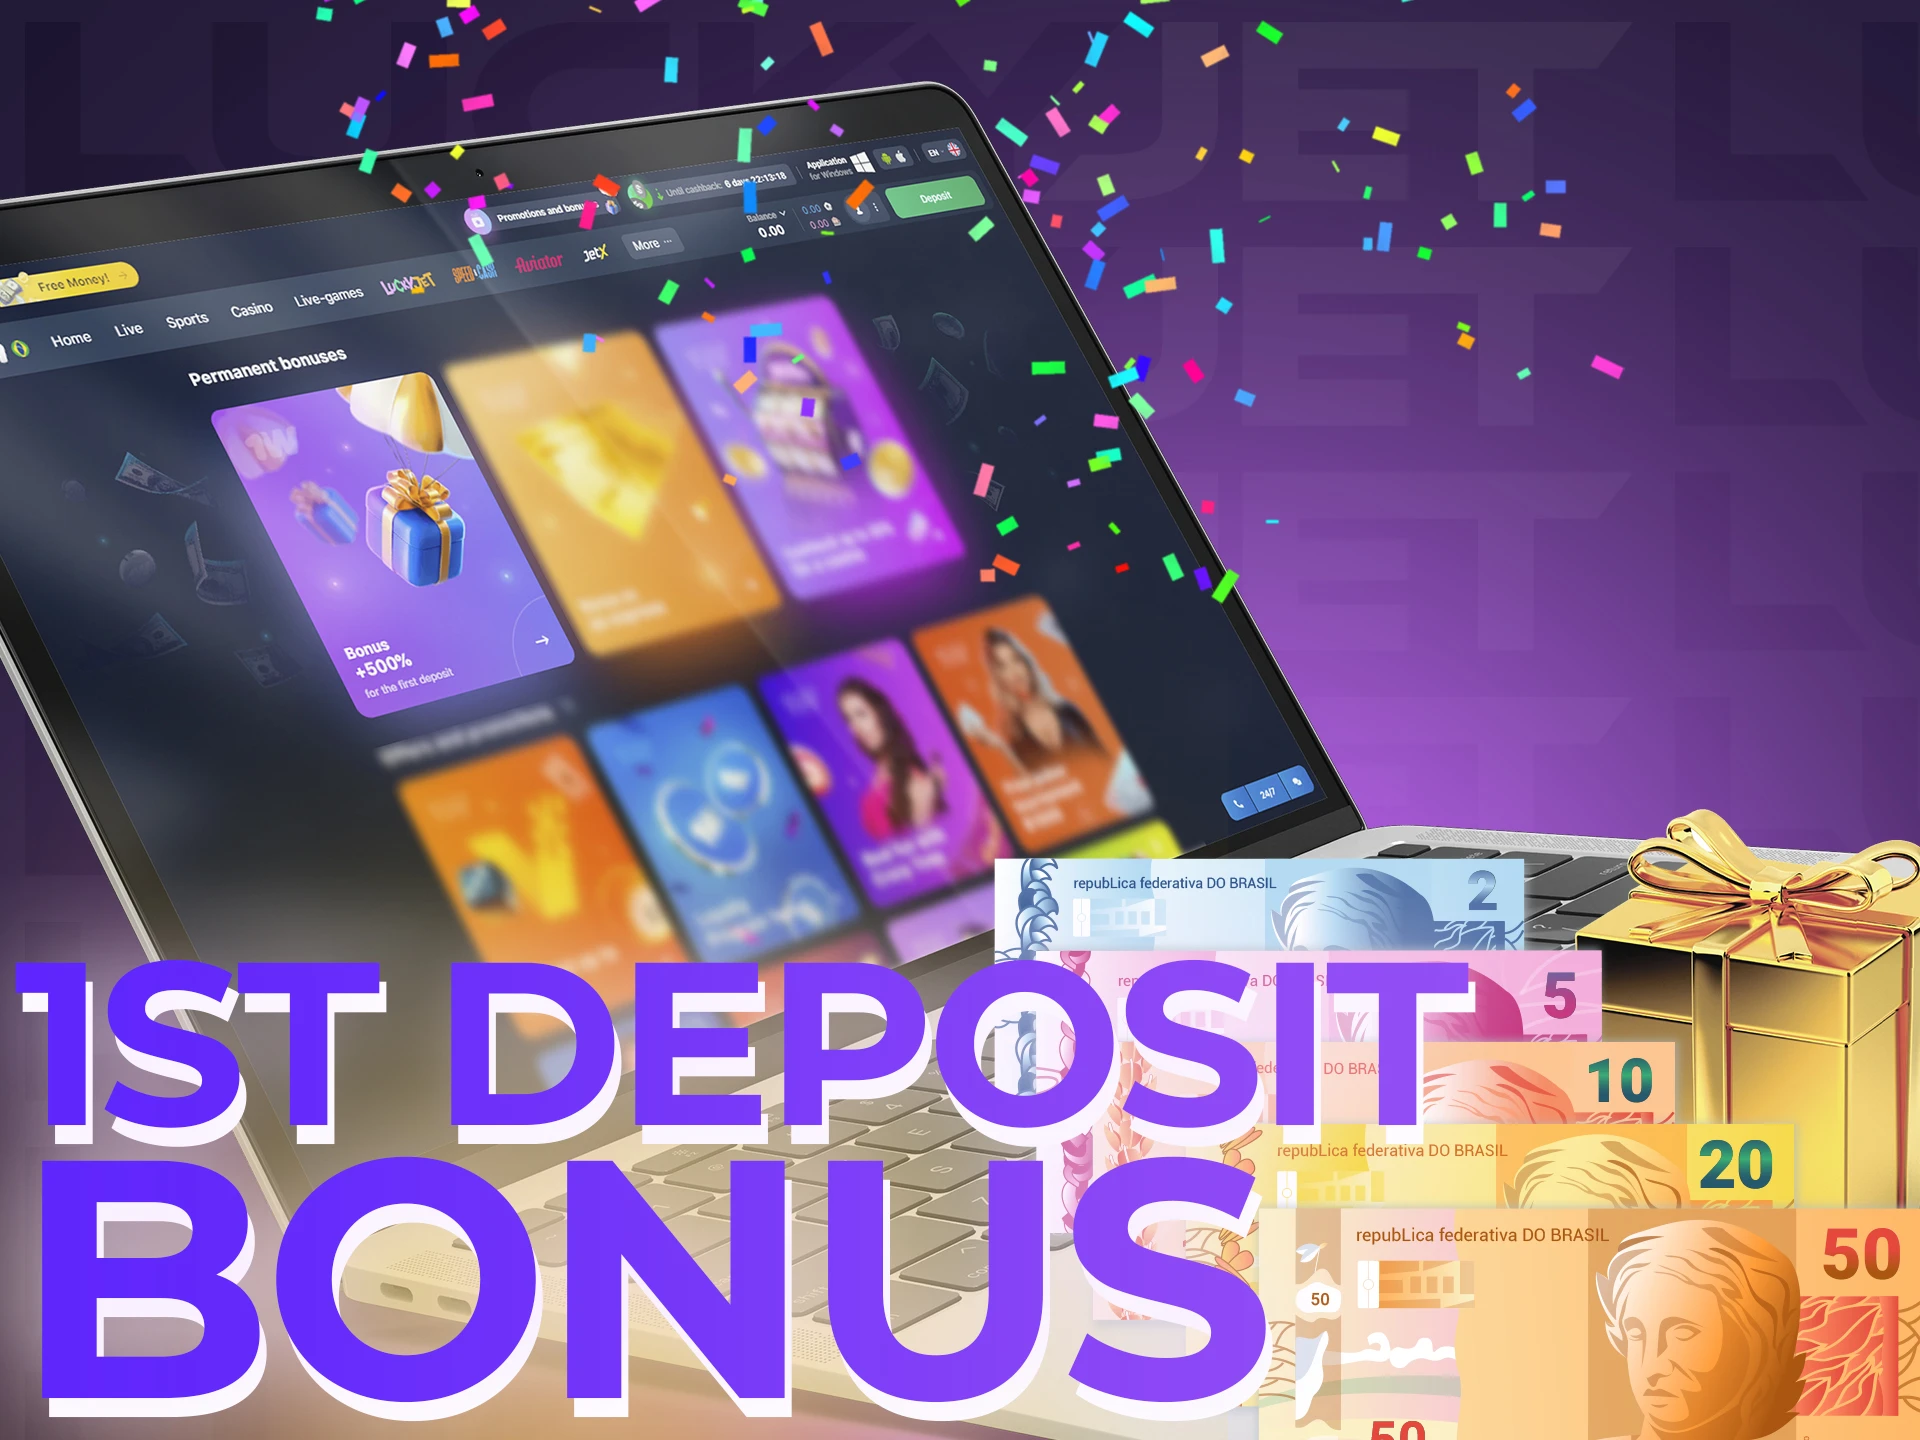 Get a special bonus on your first deposit at 1win.